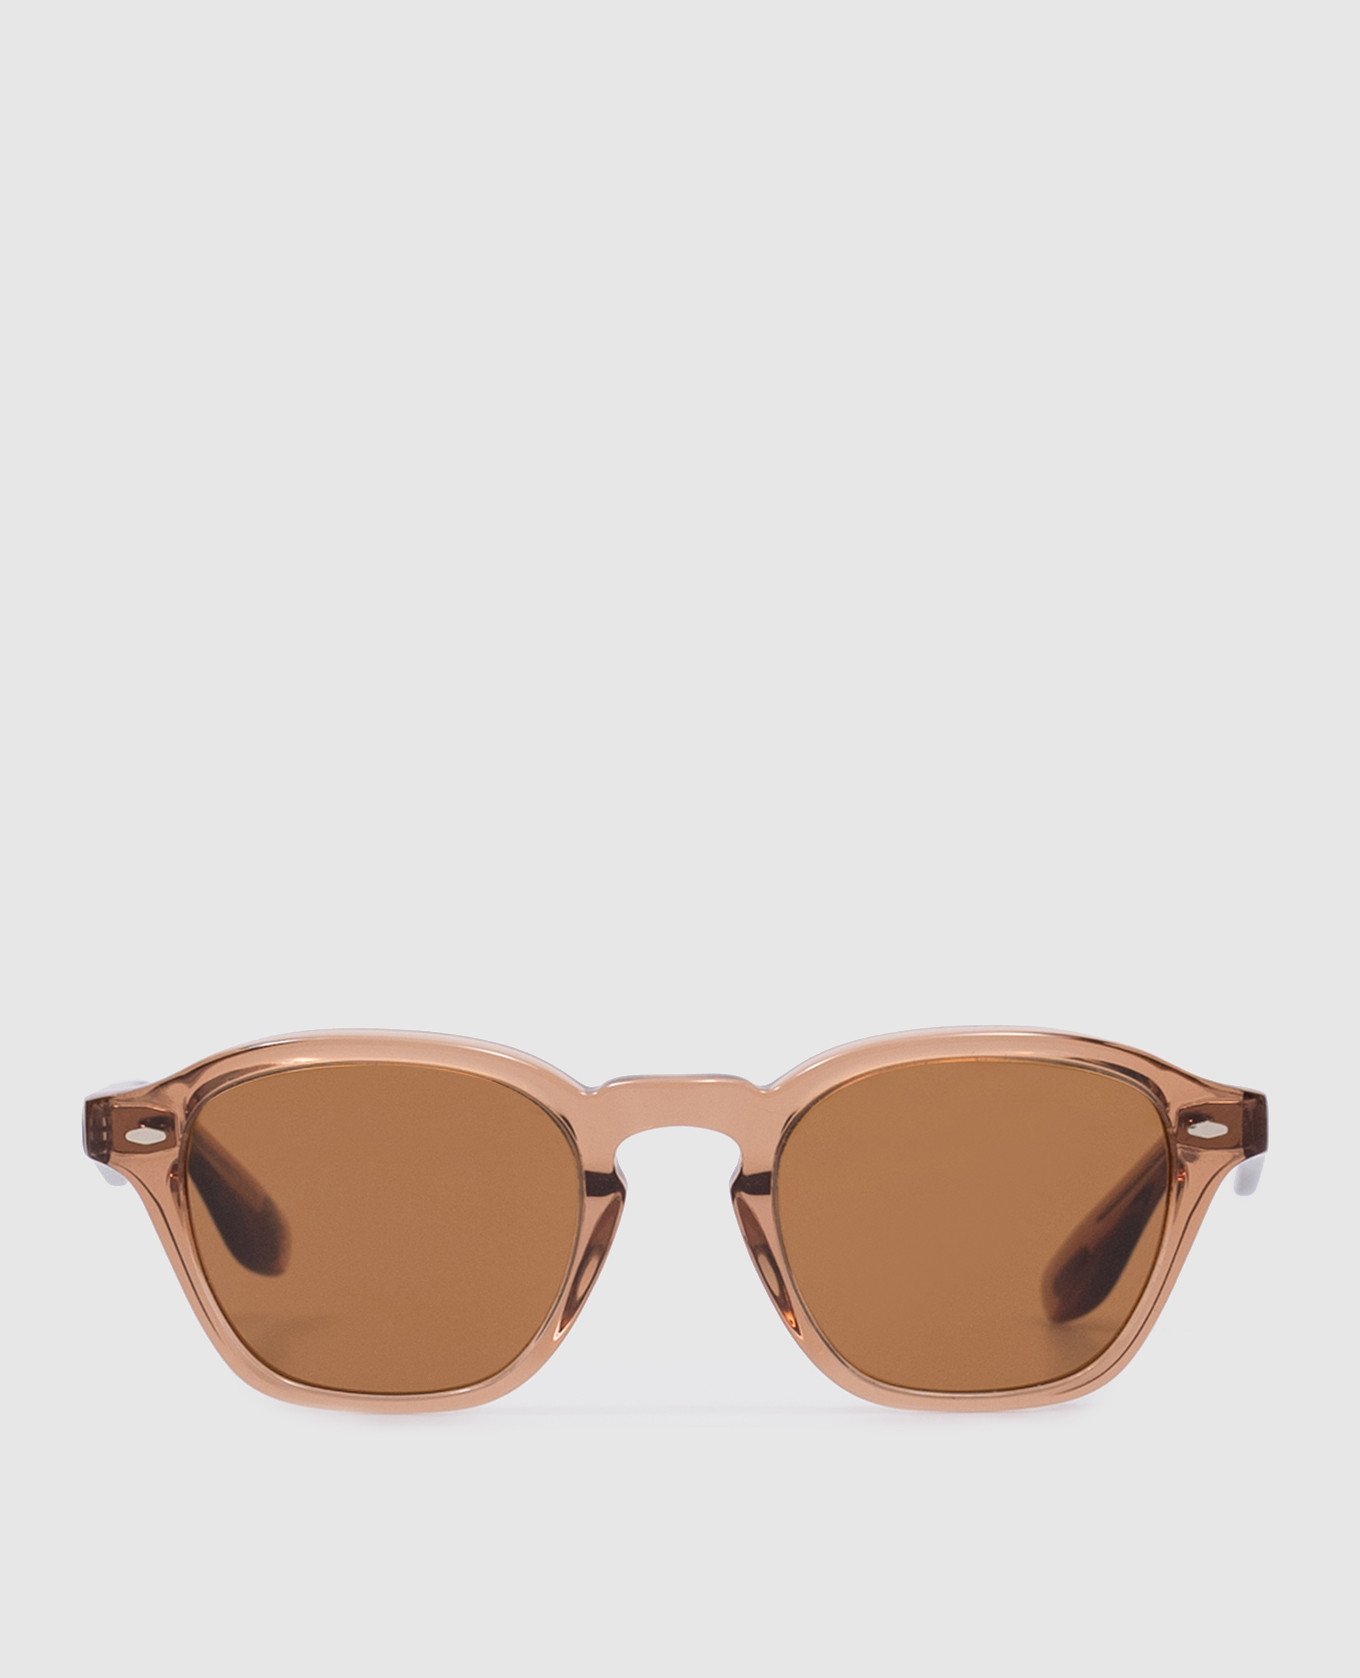 Brown Peppe sunglasses in collaboration with Oliver Peoples